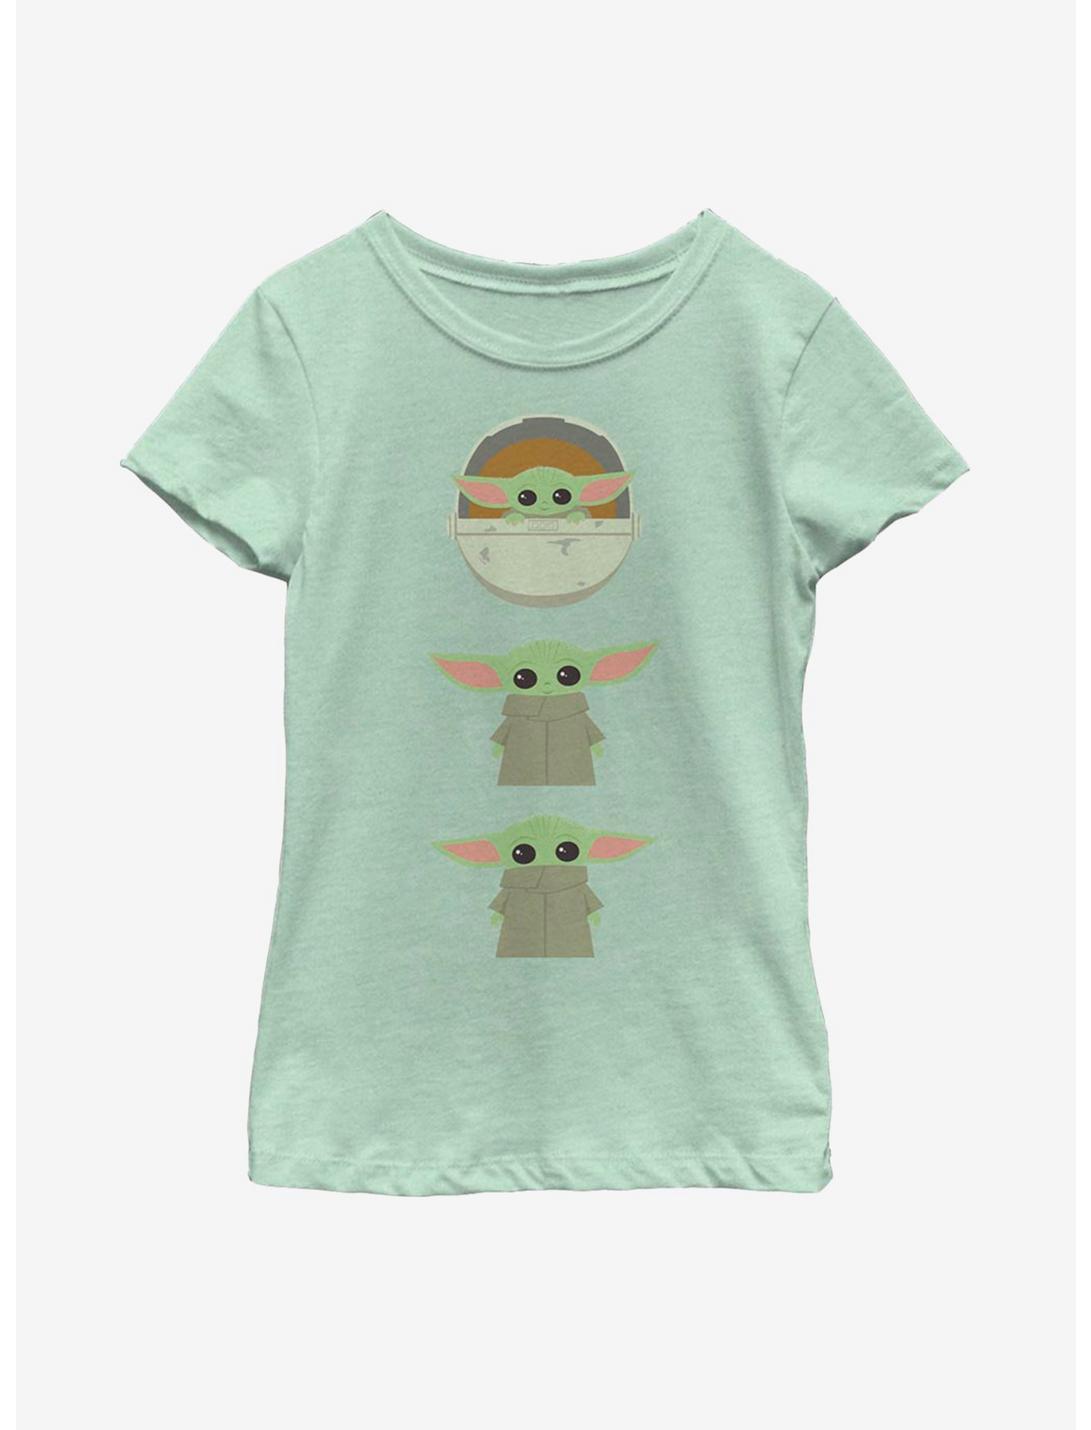 Plus Size Star Wars The Mandalorian The Child Stack Youth Girls T-Shirt, MINT, hi-res